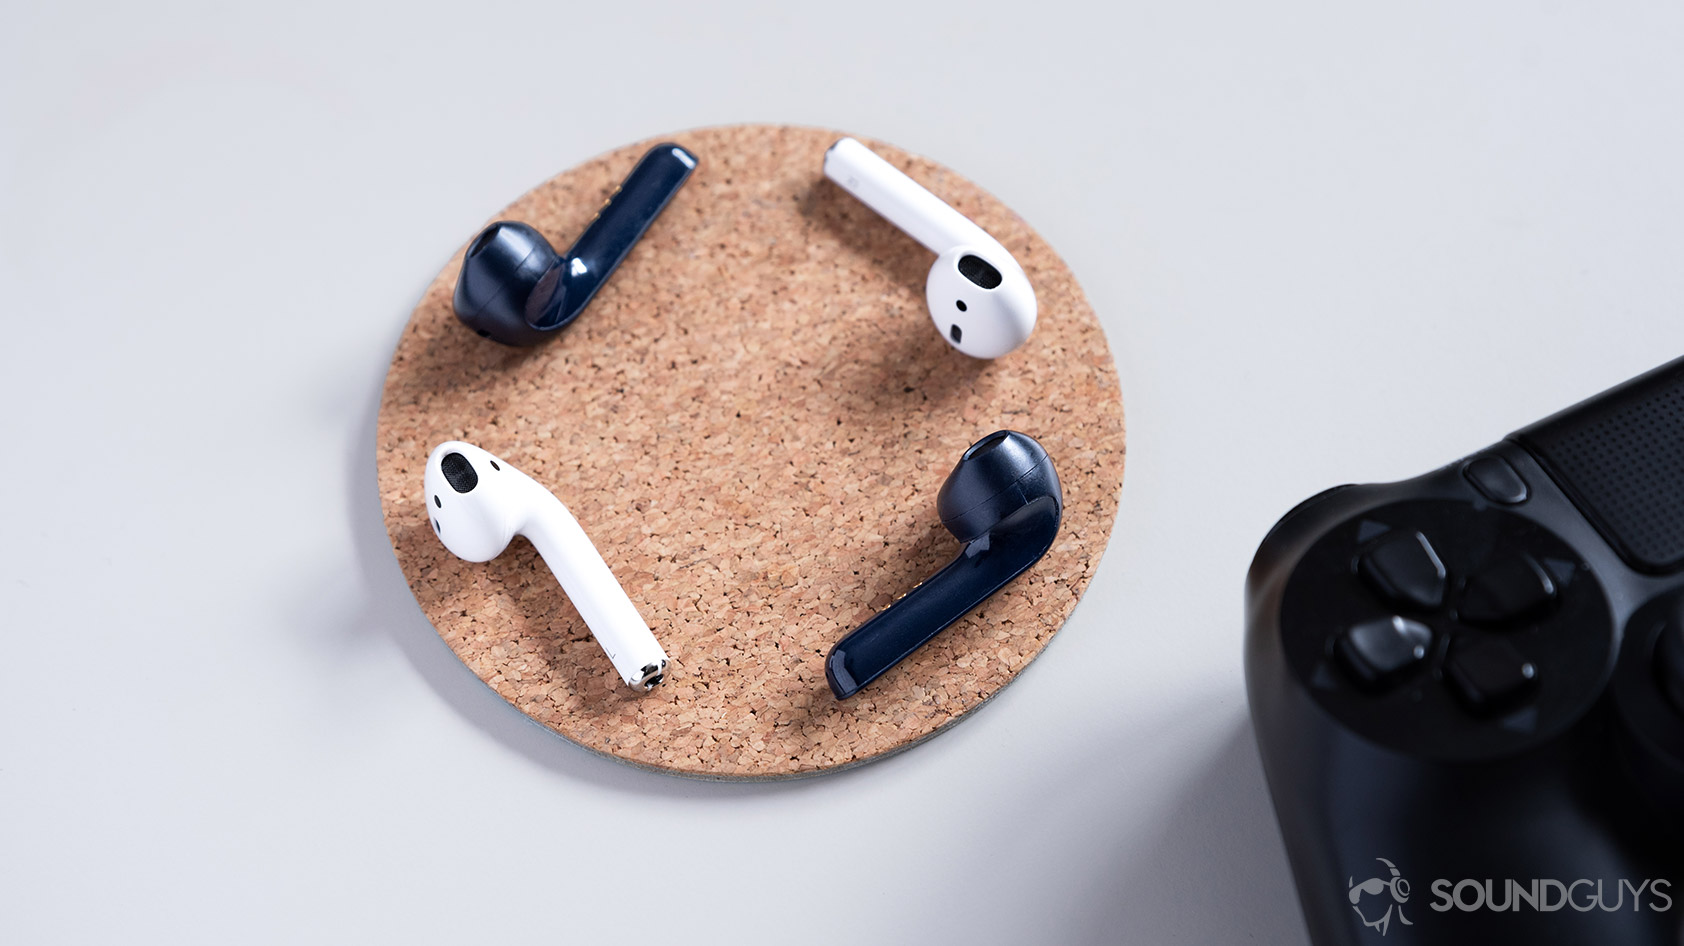 Mobvoi TicPods 2 Pro true wireless earbuds compared to the Apple AirPods on a cork coaster.